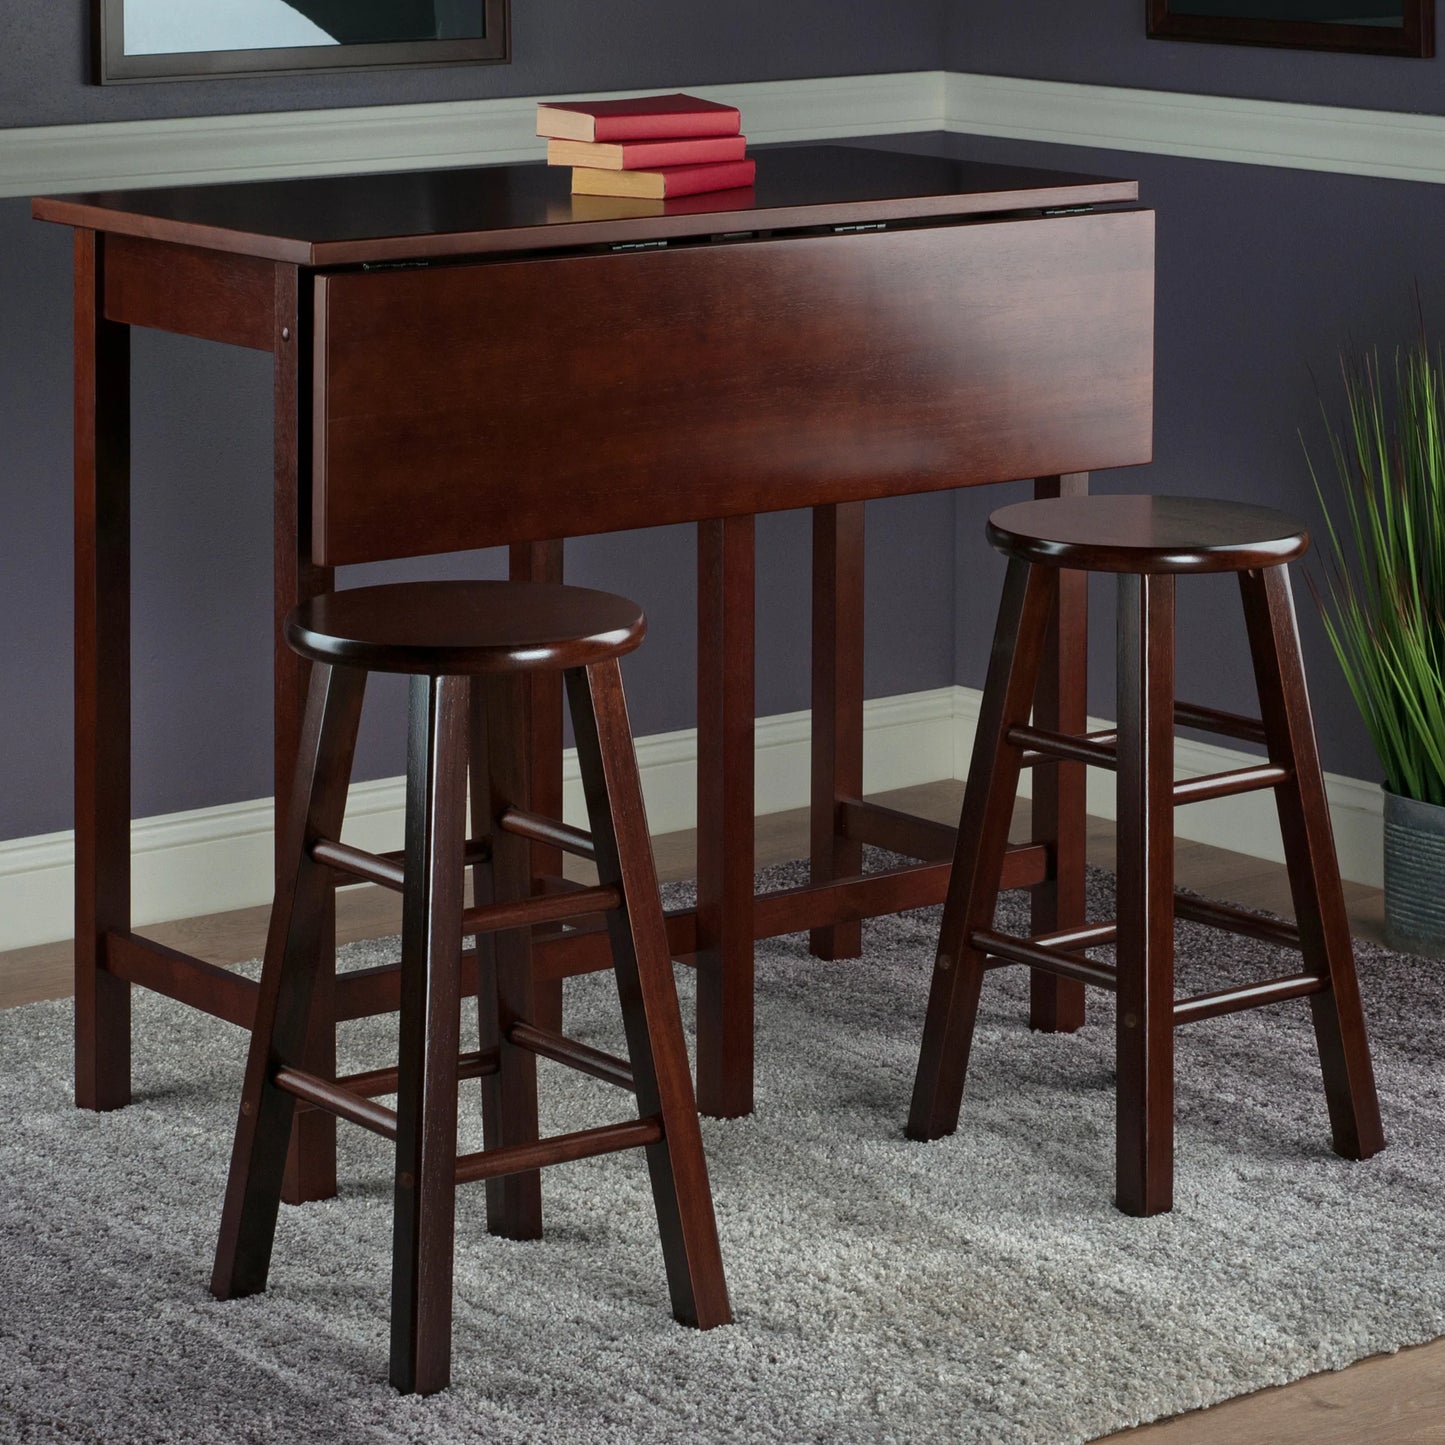 WINSOME Pub Table Set Lynnwood Drop Leaf Island Table with Counter Stools, Walnut